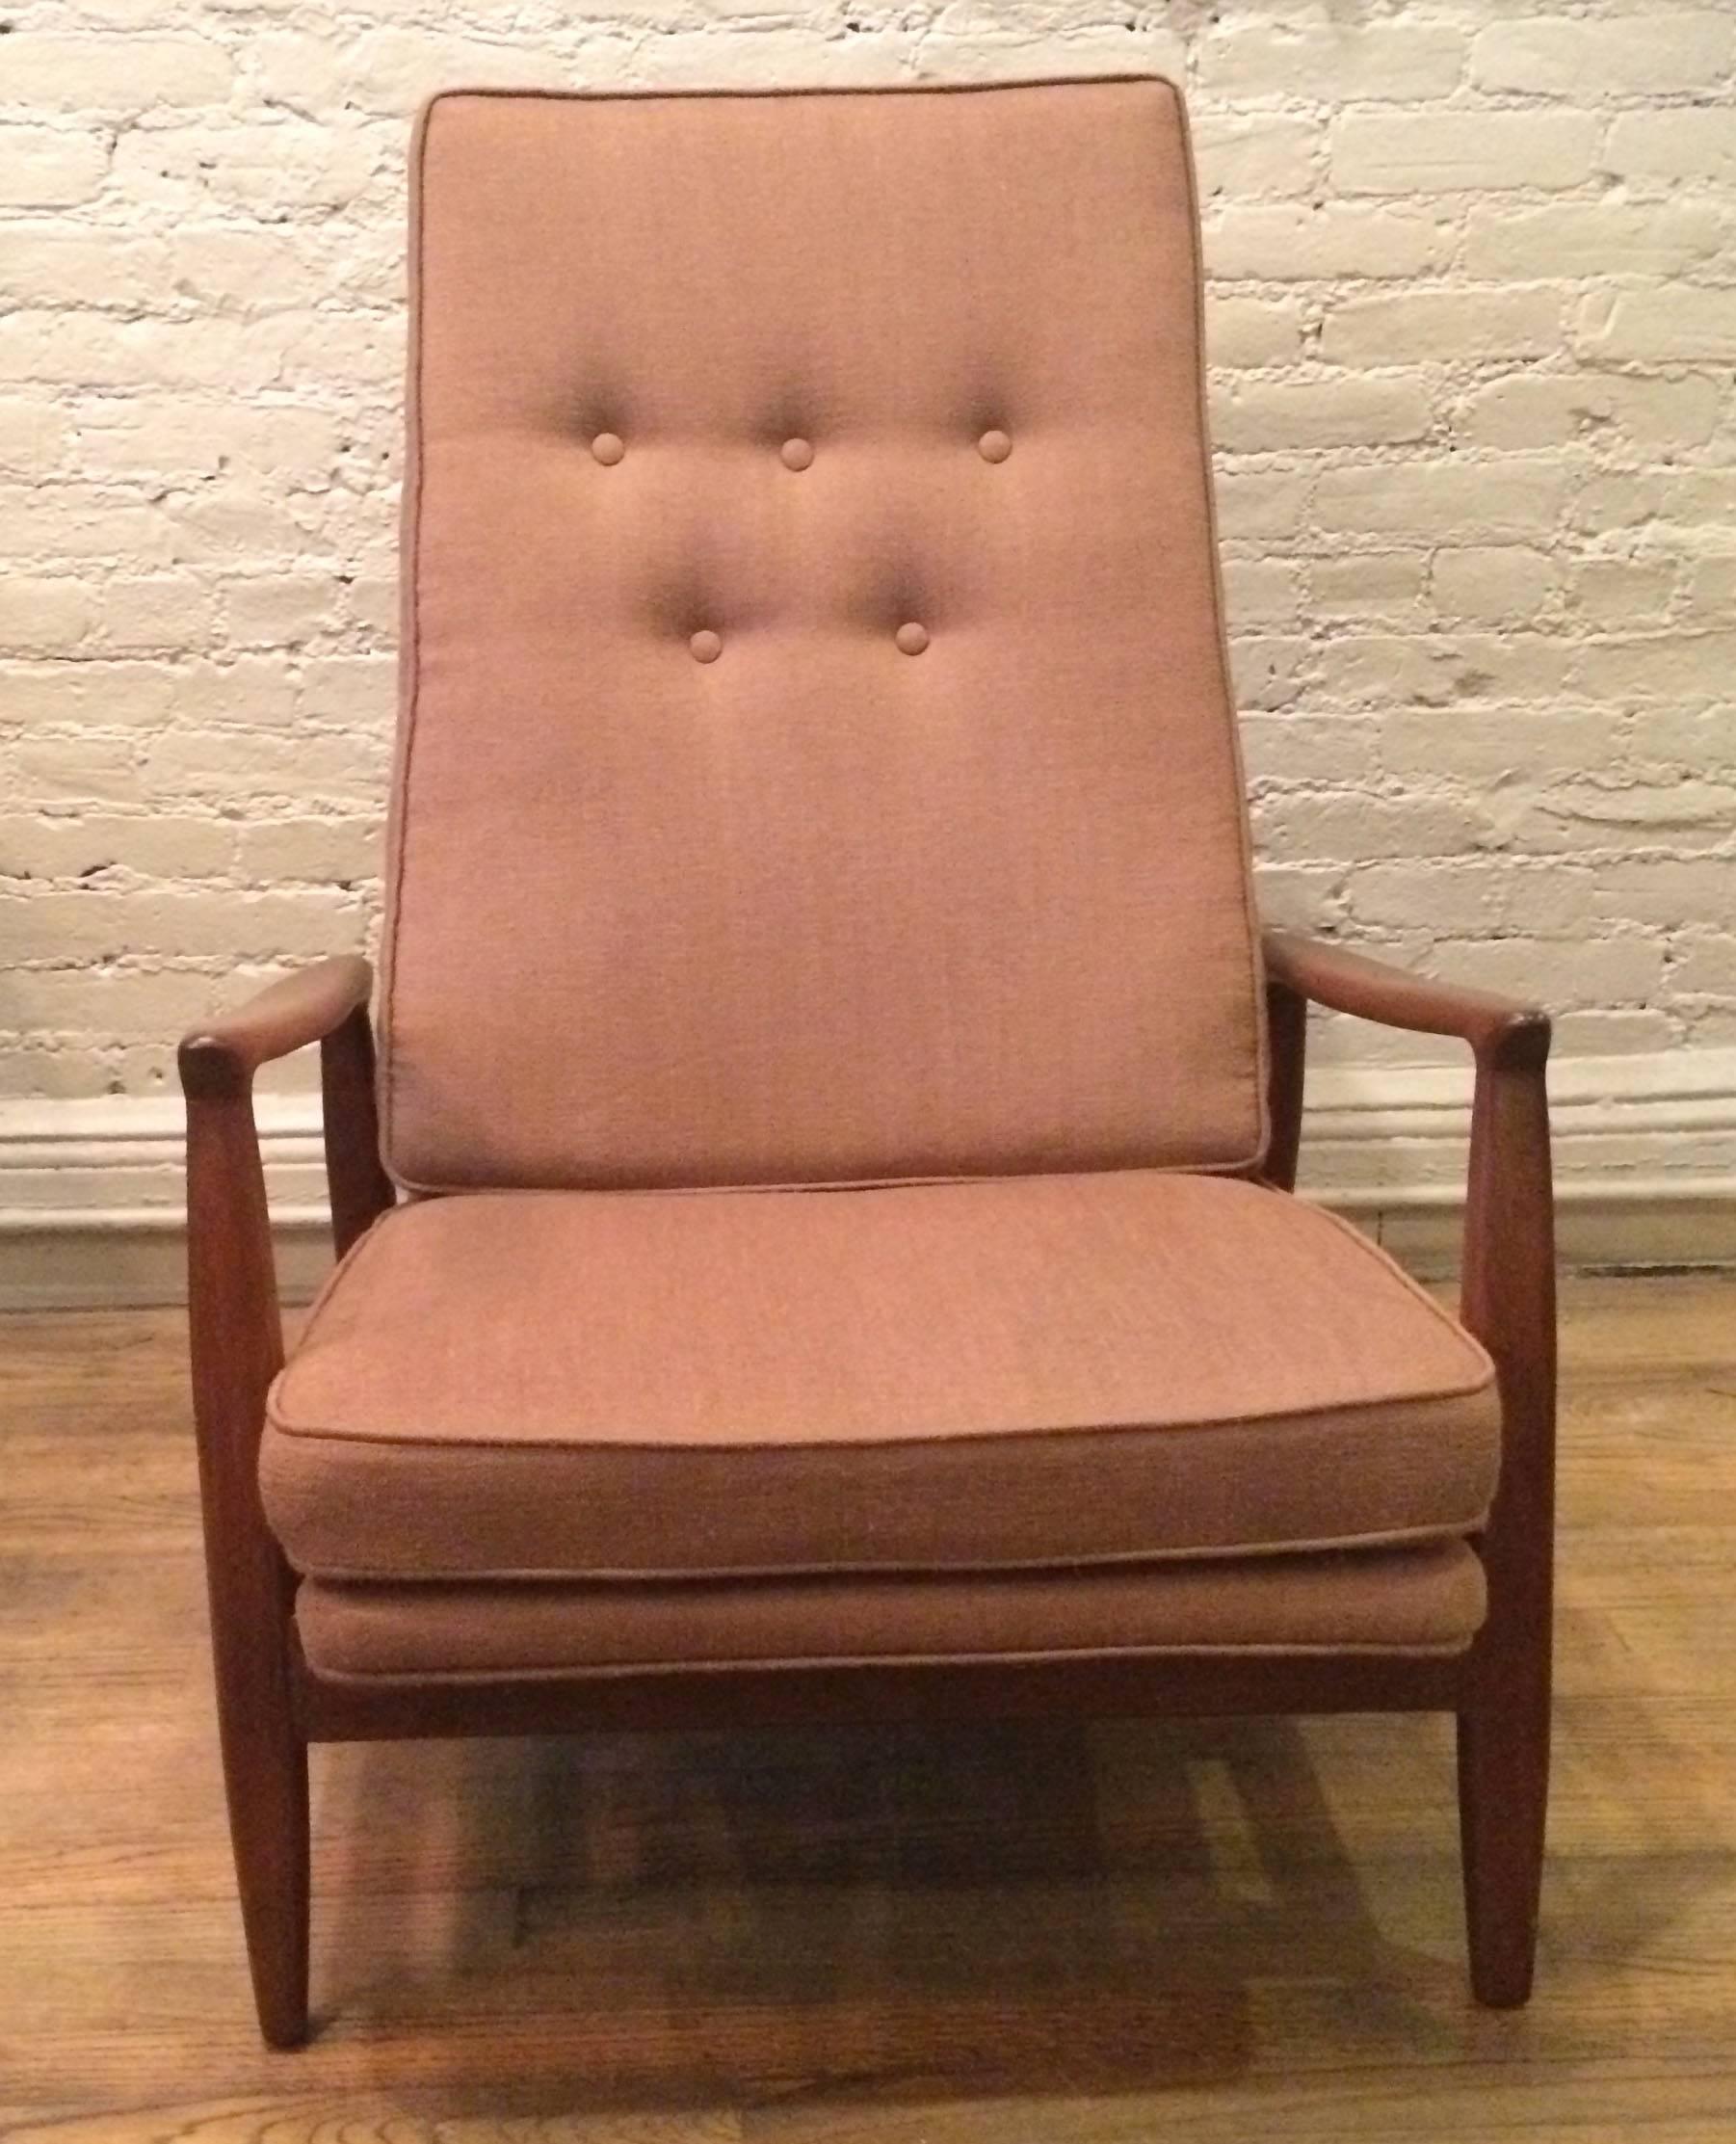 Mid-Century Modern, walnut, lounge chair by Milo Baughman for Thayer Coggin is newly restored with linen upholstery.